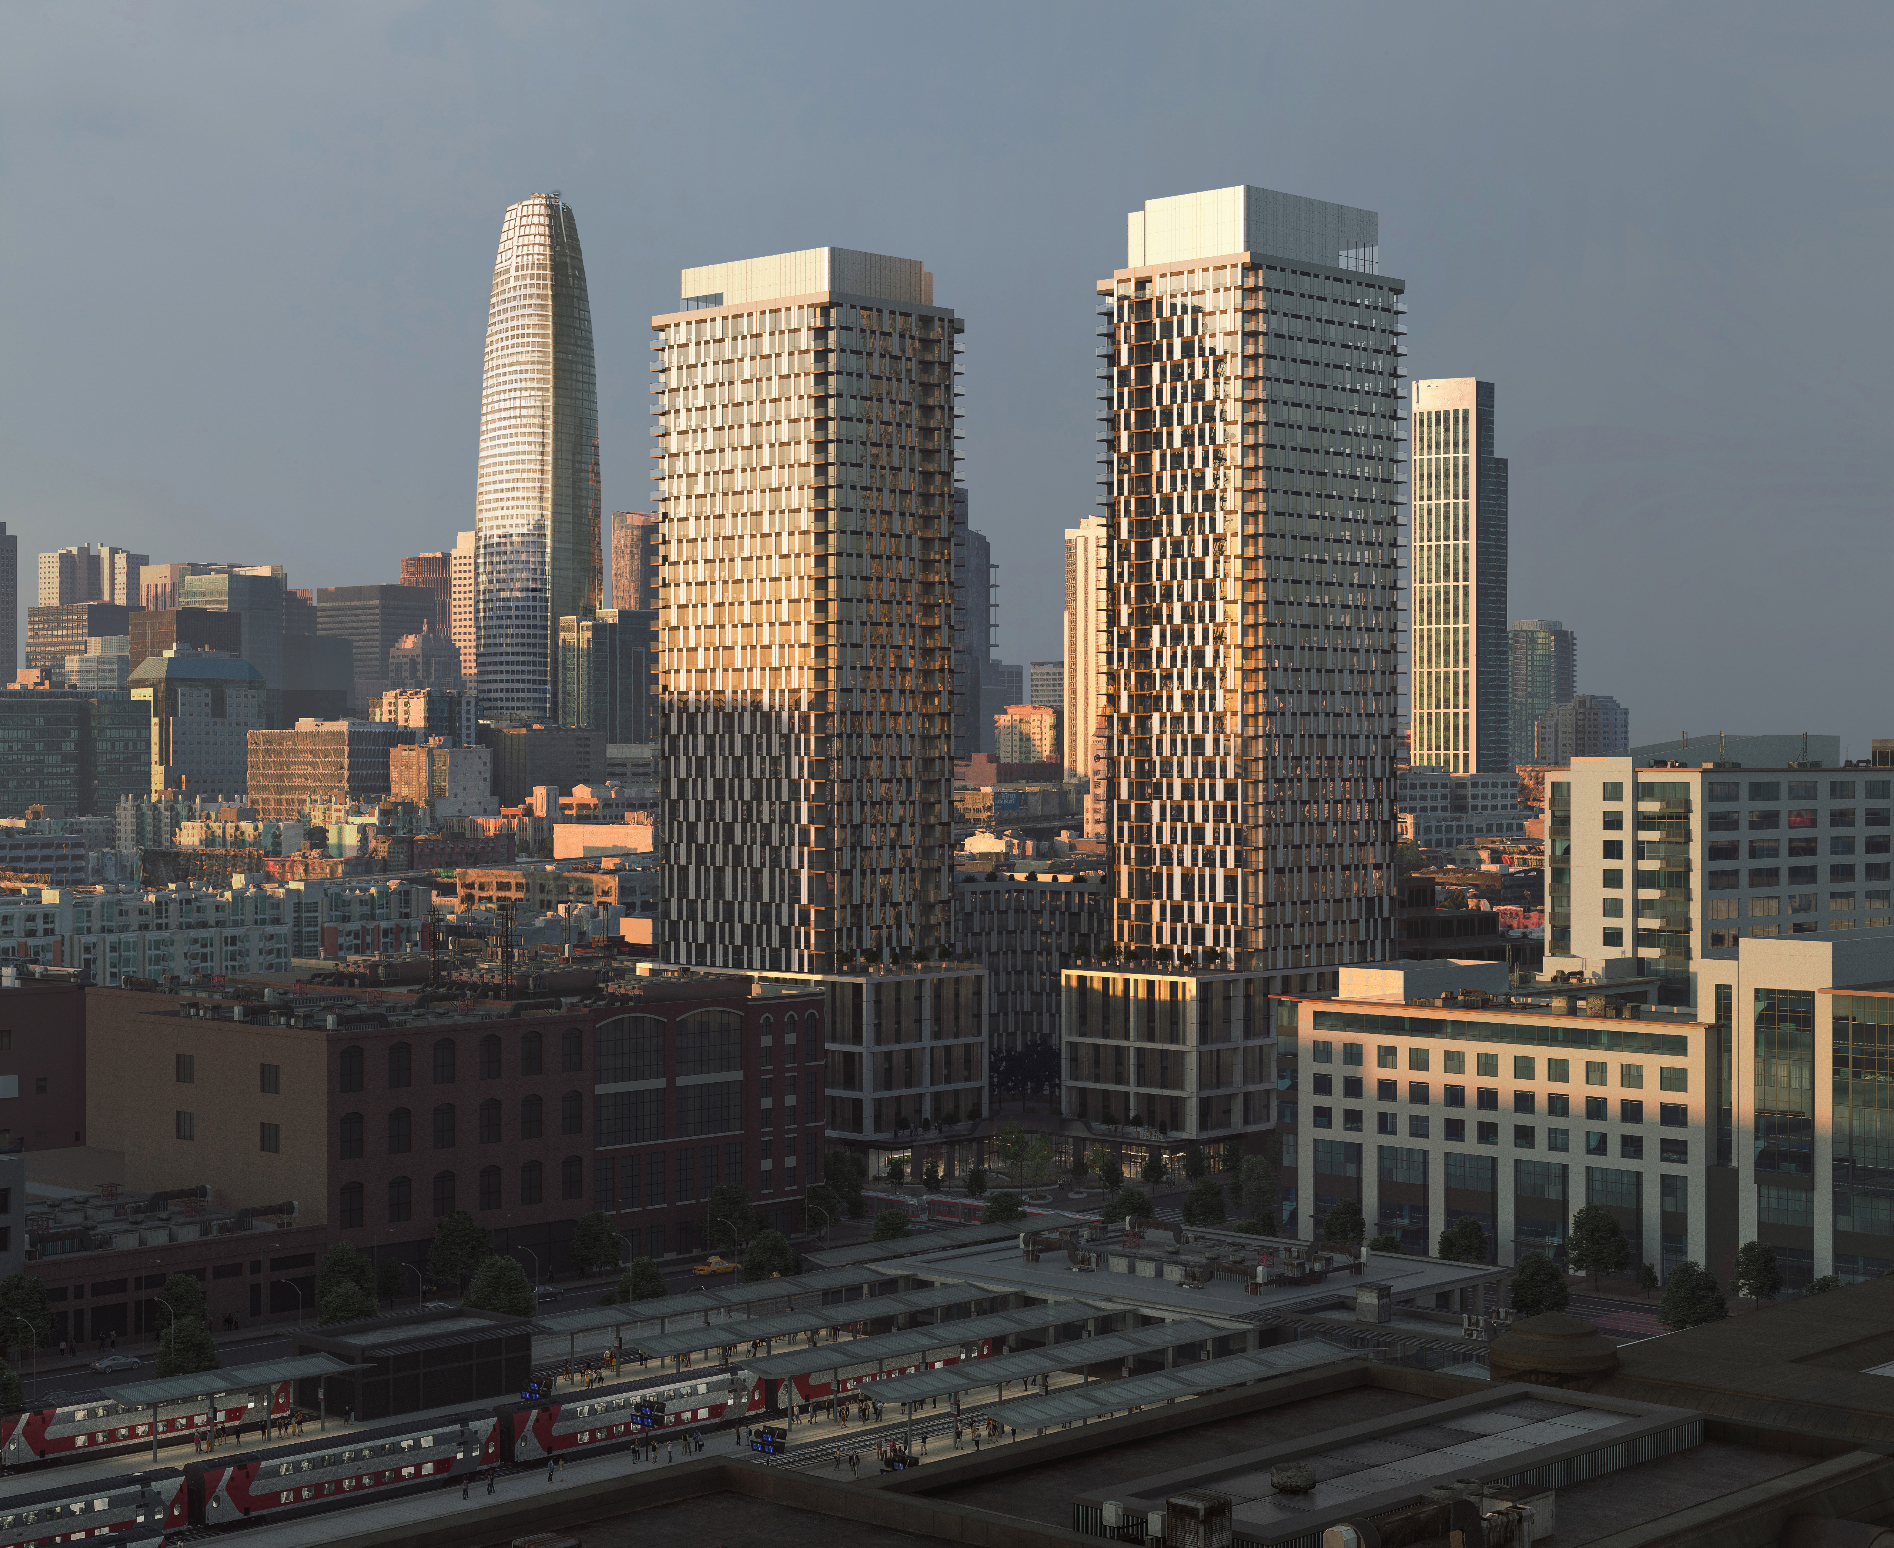 Two tall buildings rise from a shared podium base against a skyline with other tall buildings nearby and a train yard in the near foreground.